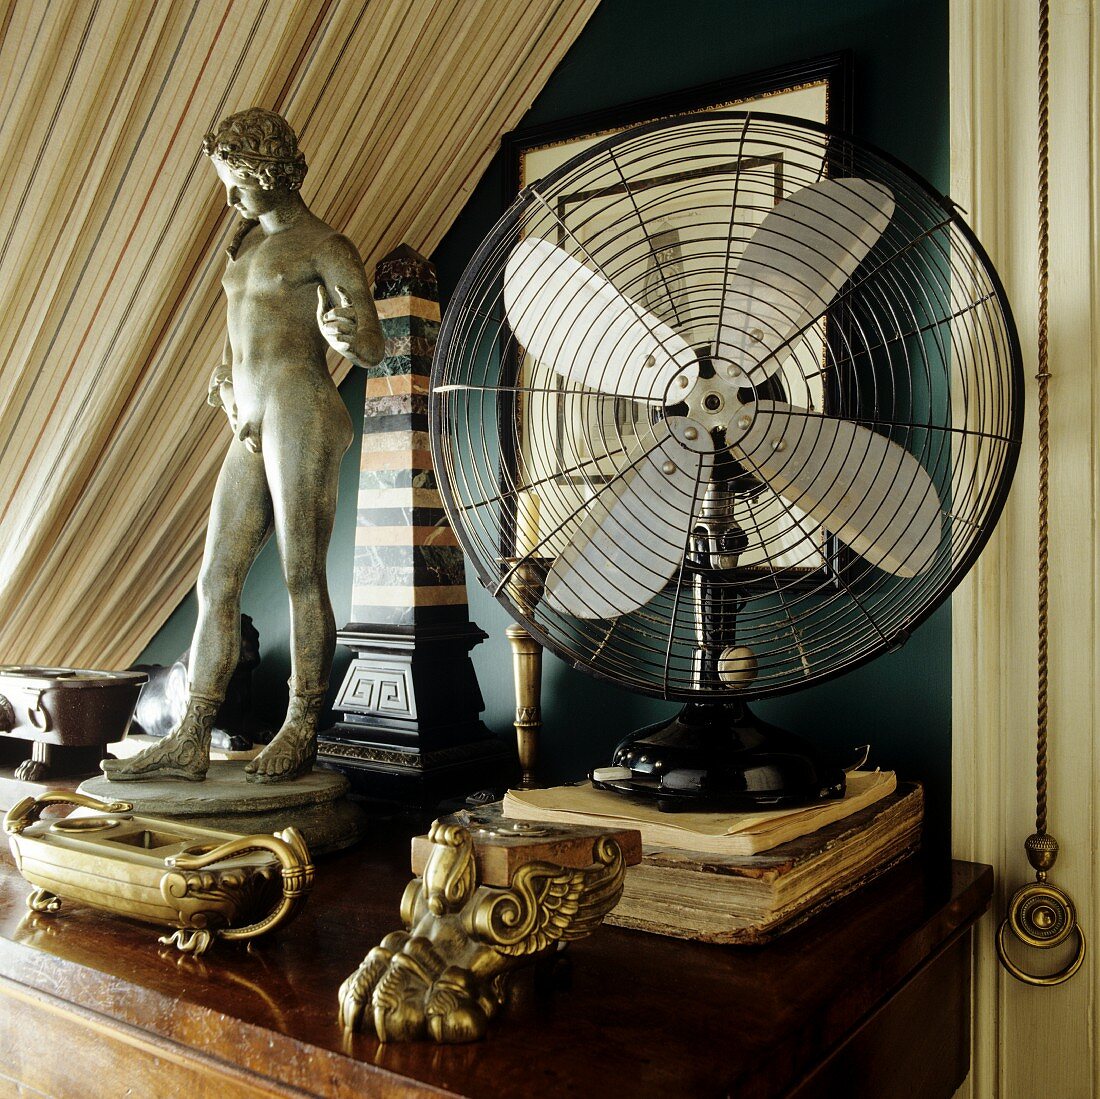 Brass ornaments and antique, miniature stone figurine next to fan on wooden table